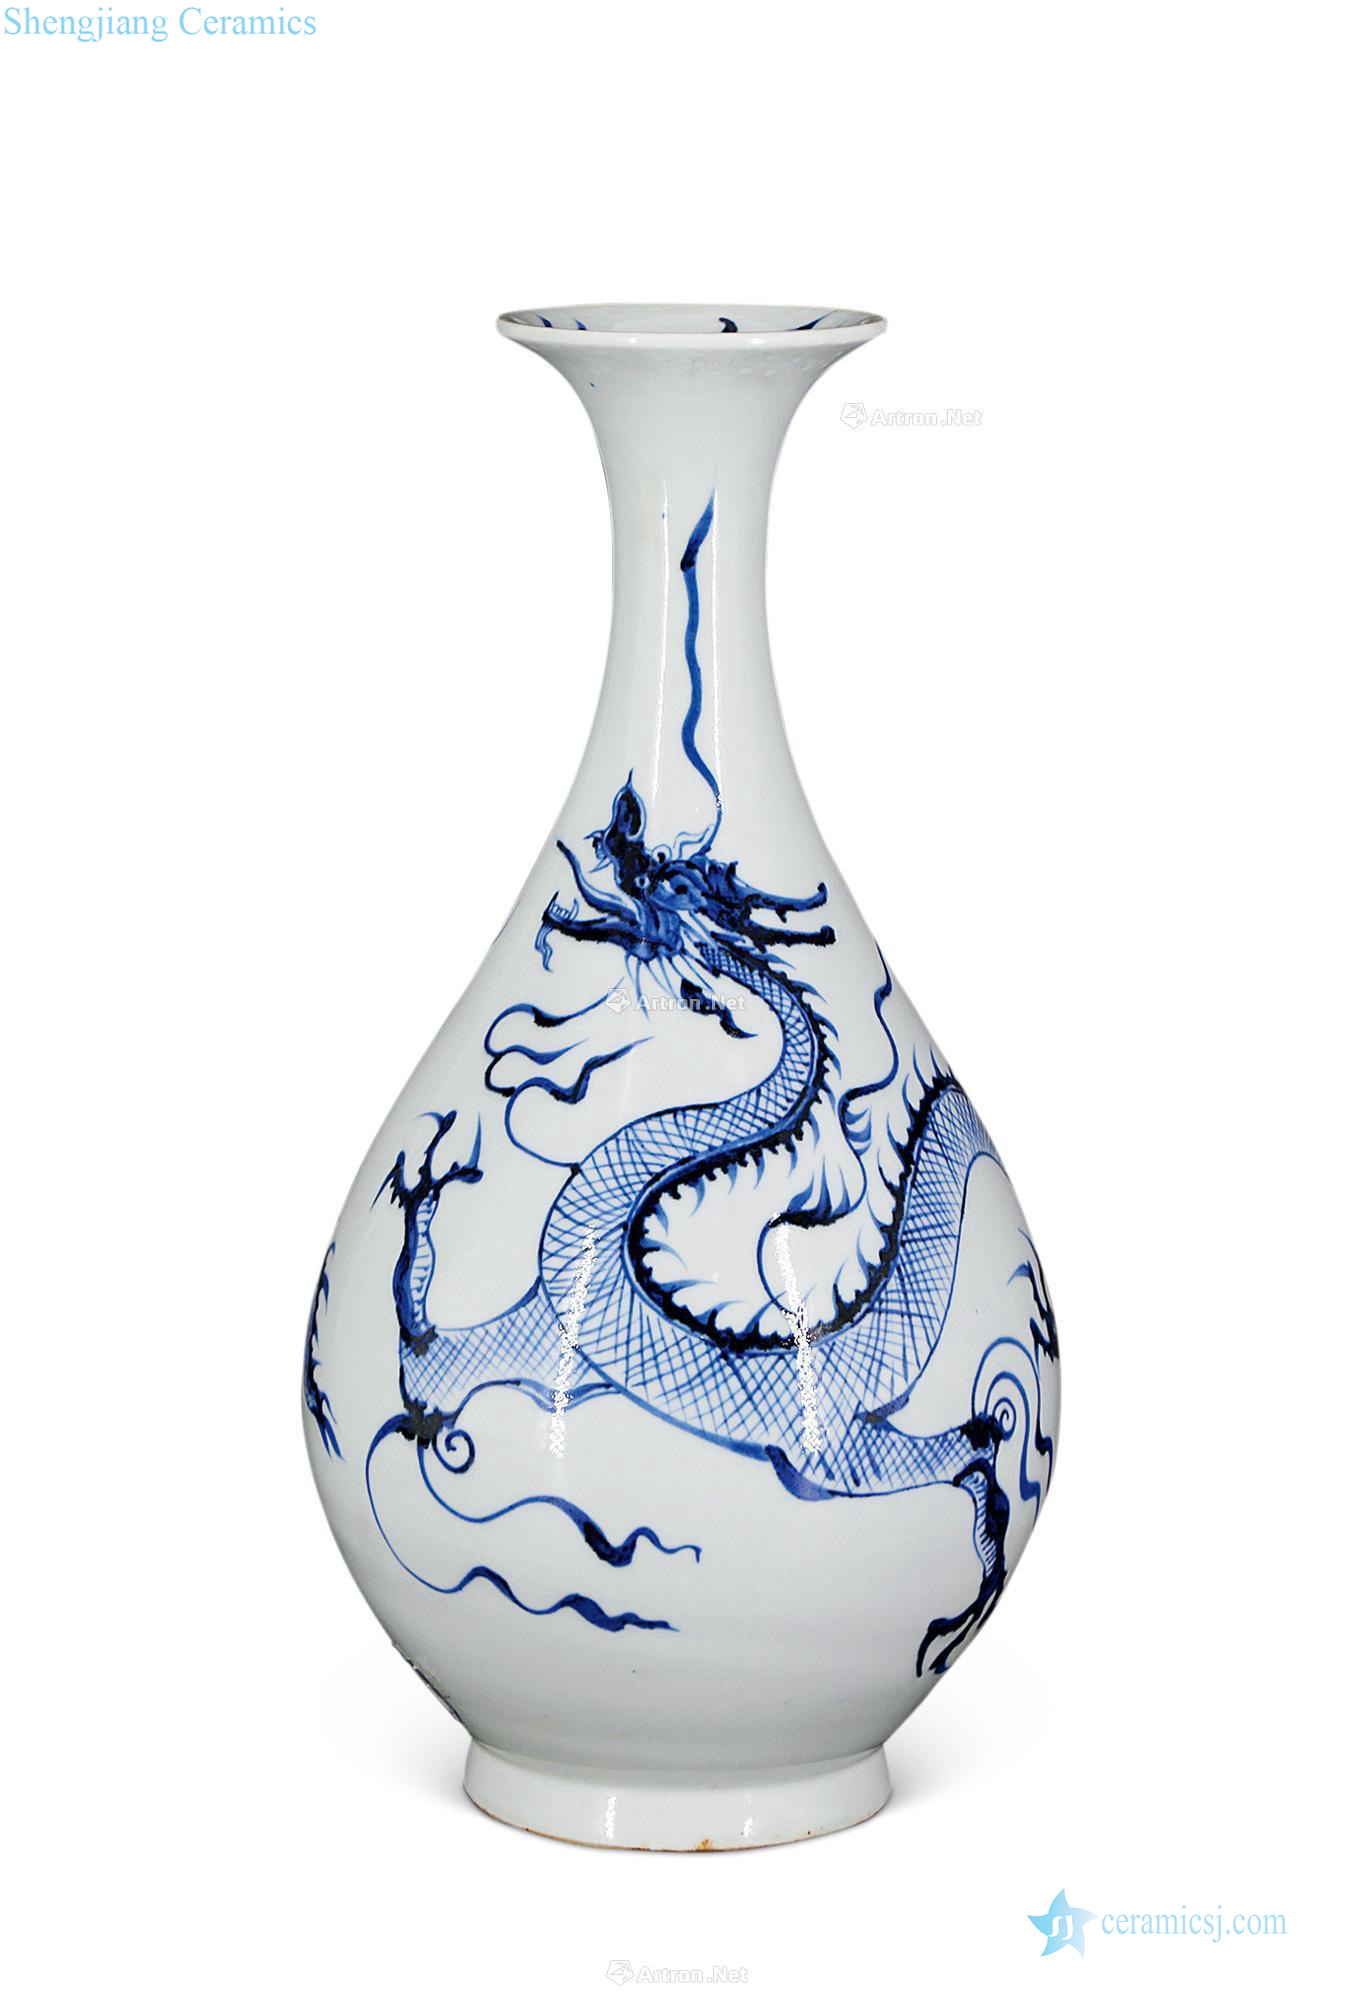 The yuan dynasty Blue and white dragon okho spring bottle